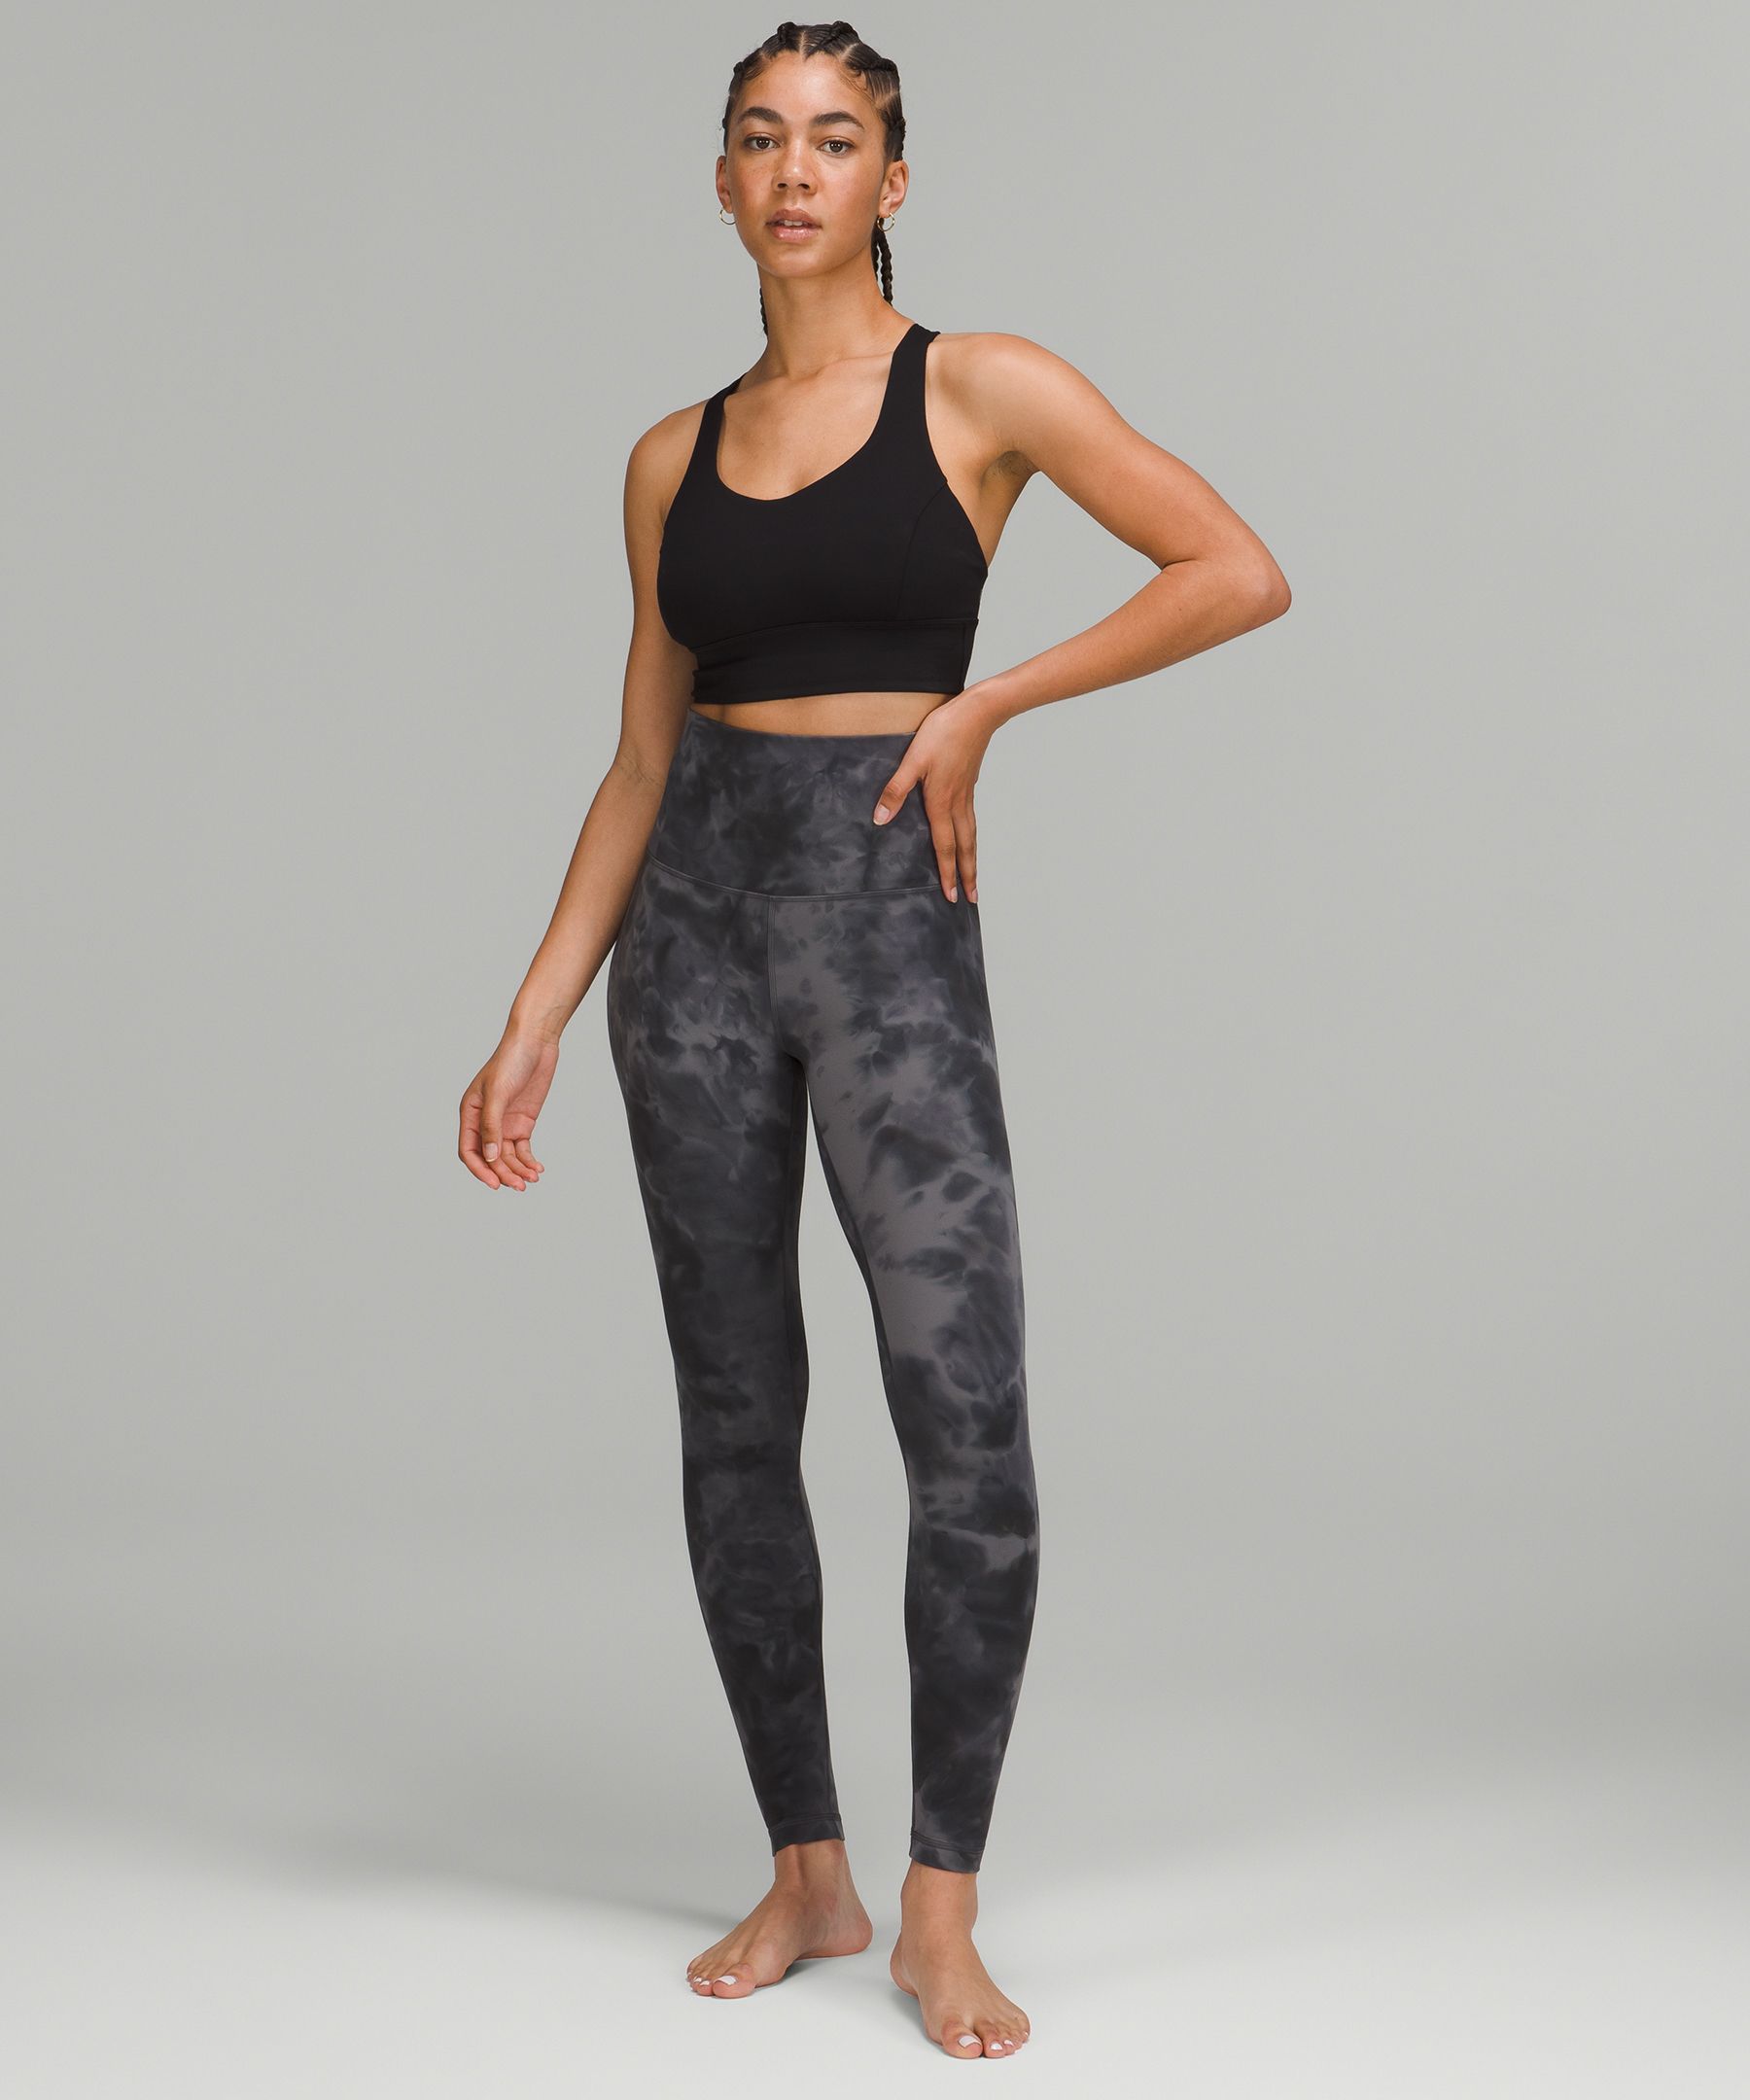 Lululemon High-Waisted Yoga Pants with Sculpted Fit and Breathable Fabric